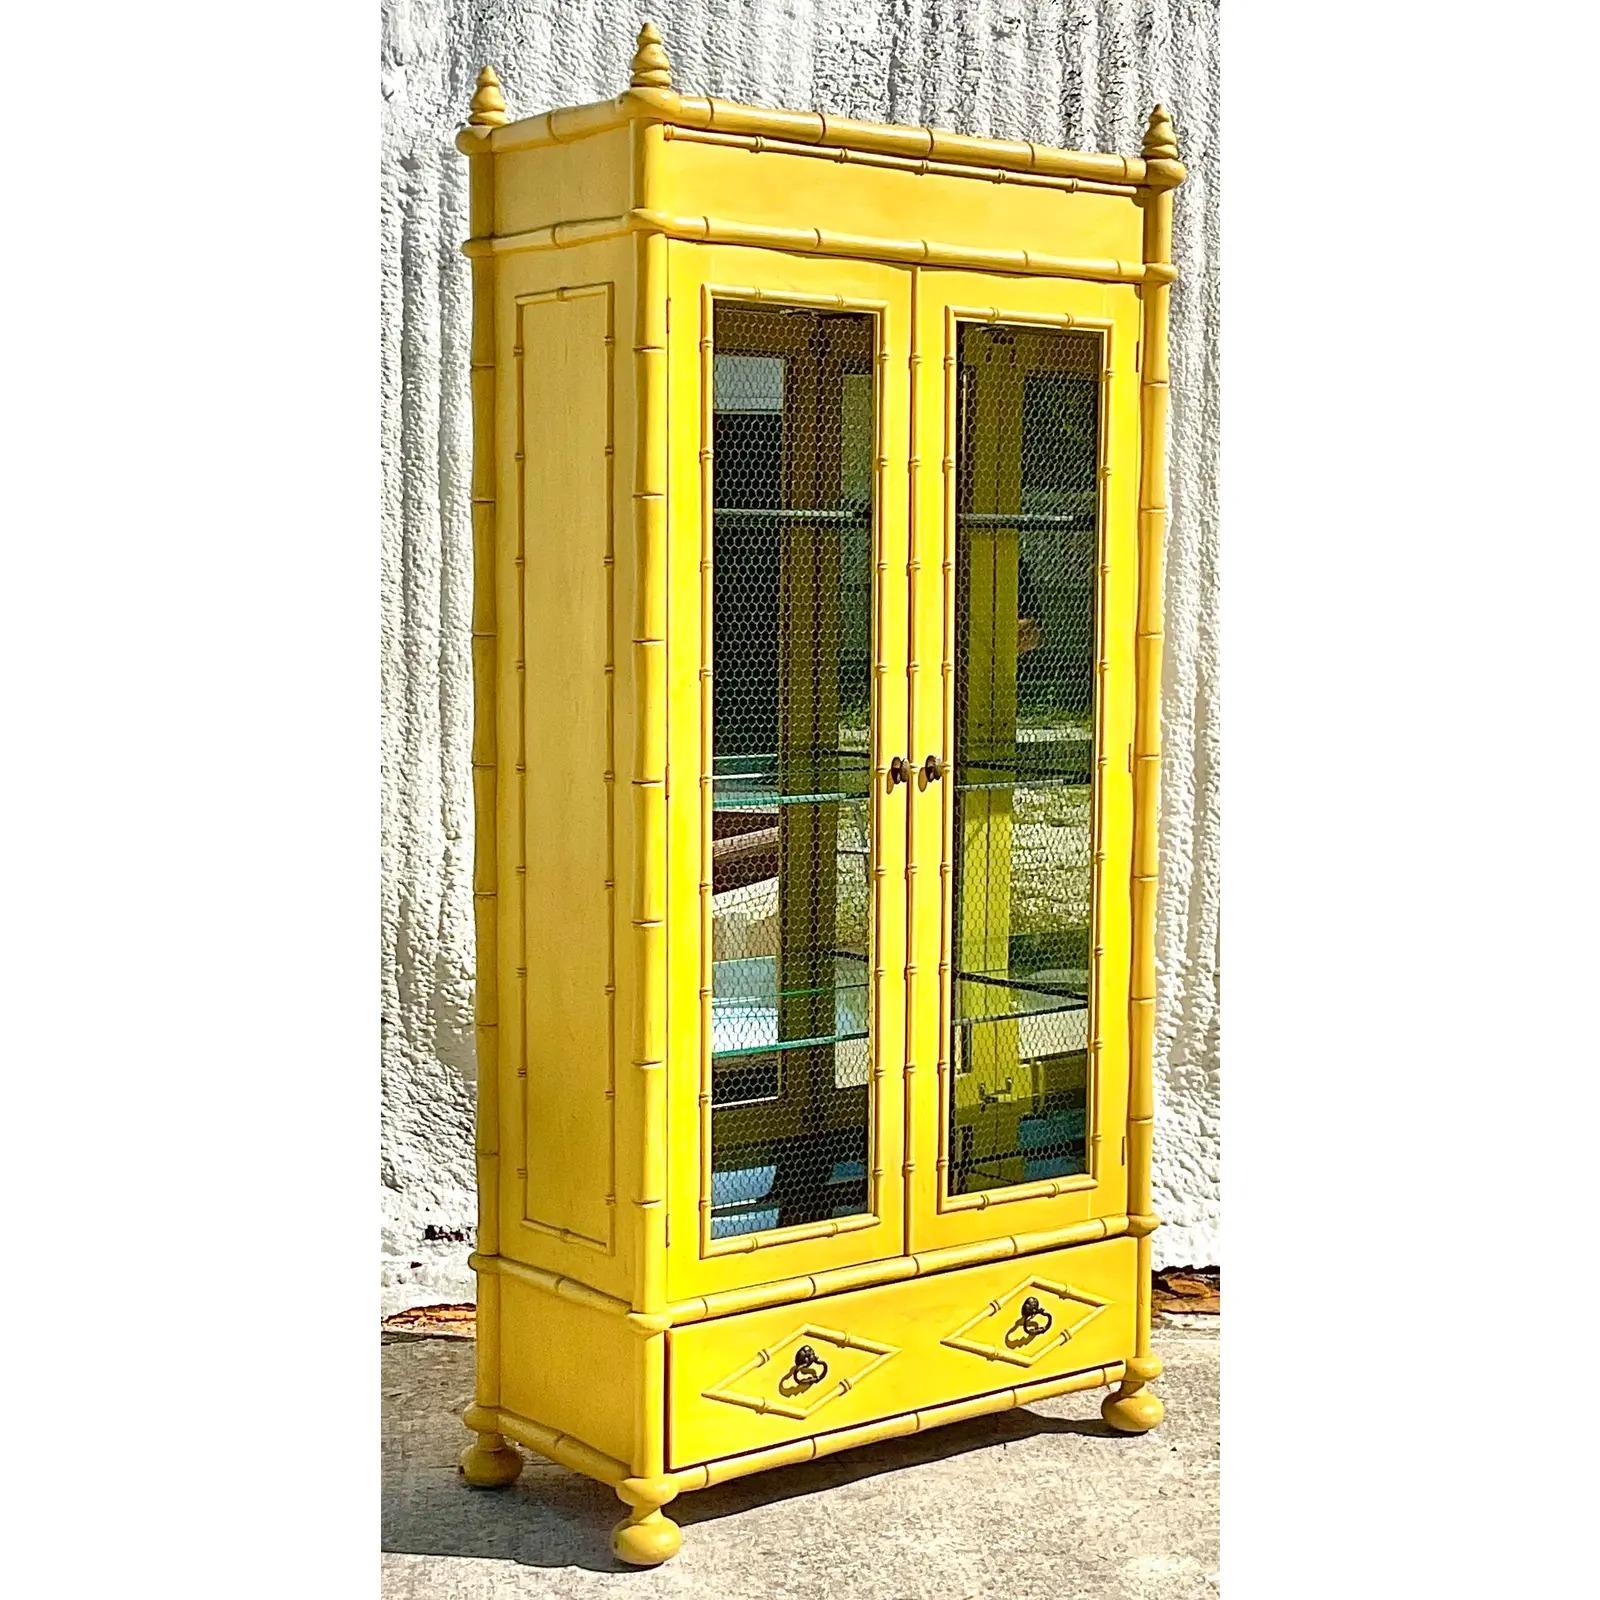 A fantastic vintage Regency mirrored display cabinet. A stunning piece of furniture made by the Youngsville Star Manufacturing group. A custom piece with a fully mirrored interior and glass shelving. Brilliant yellow color with wire inset door